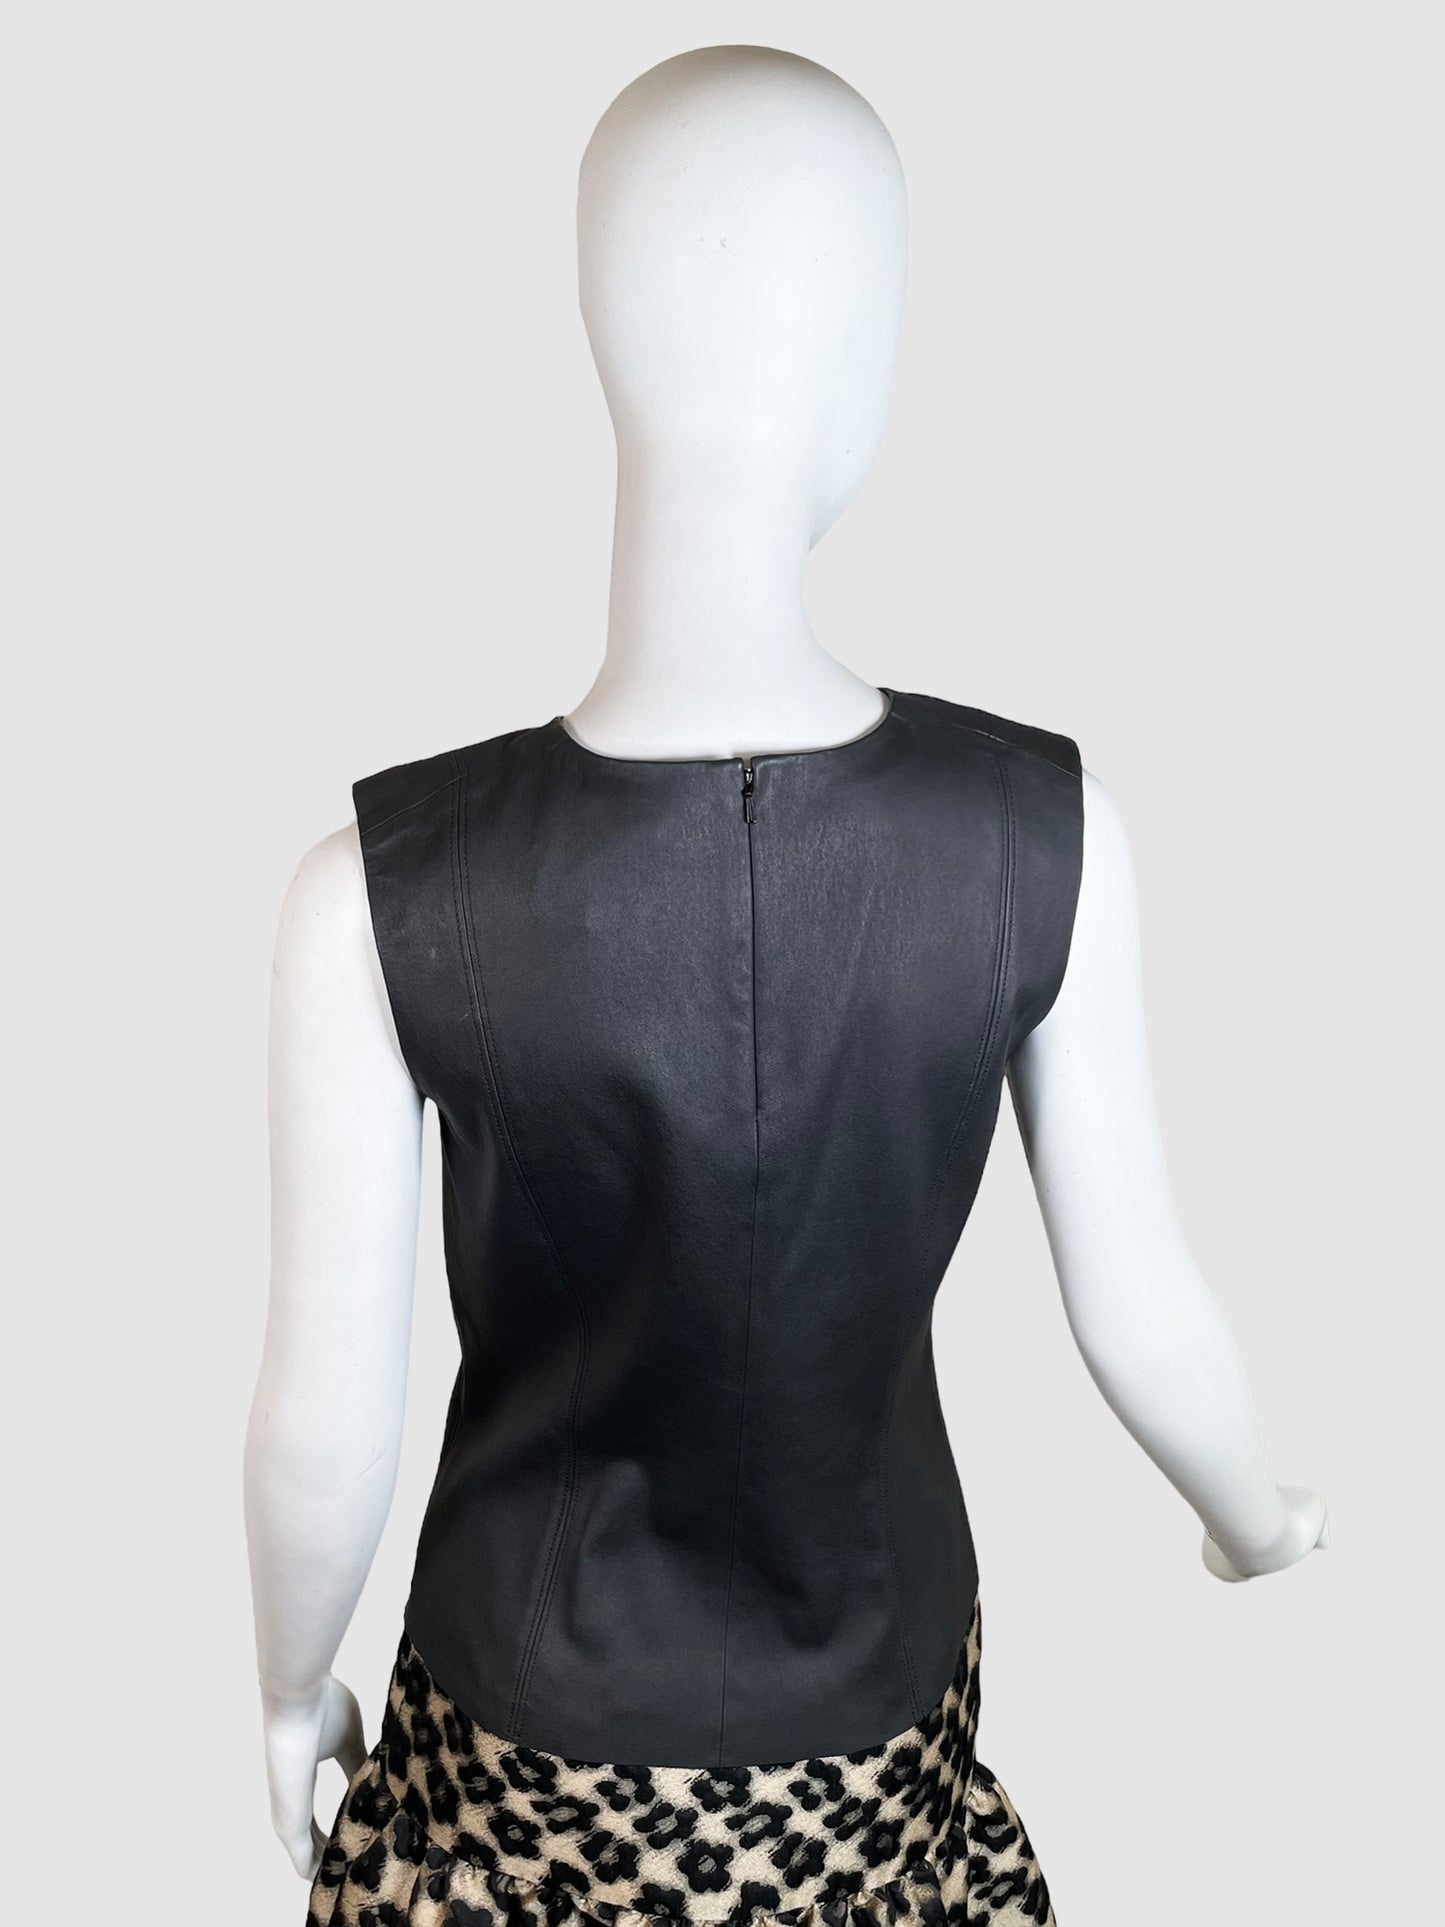 Helmut Lang Sleeveless Leather Top - Size 8